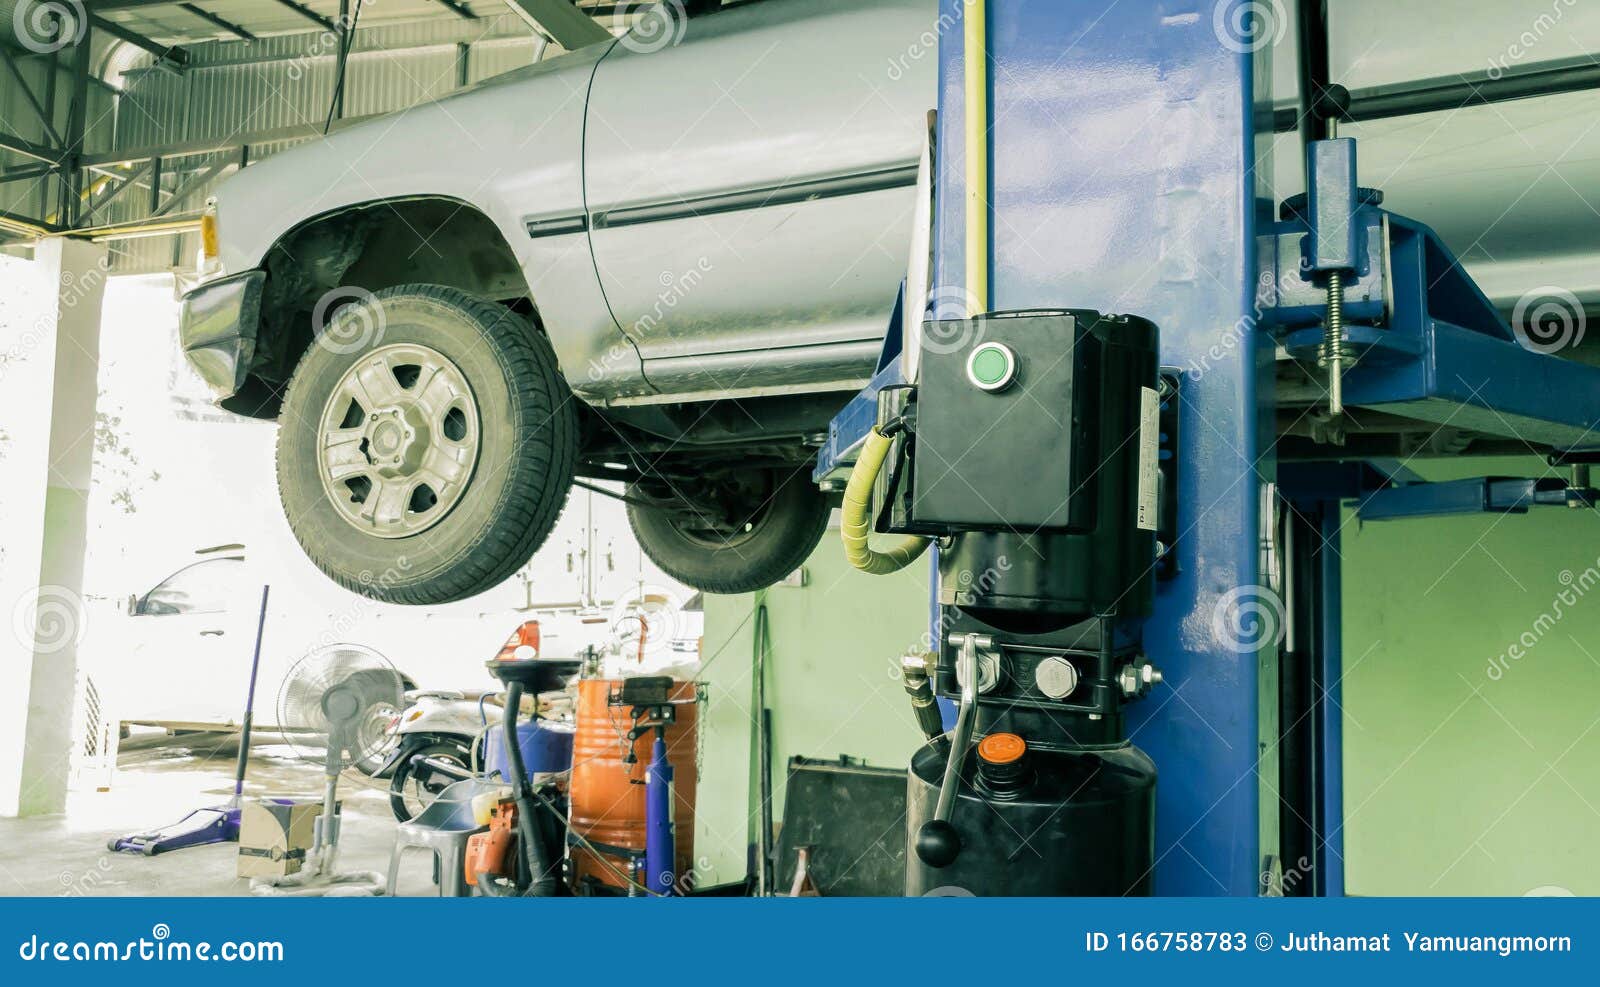 Car Lifting in Auto Industry Machine Service for Fixing Repairs Detail at  Workshop Stock Image - Image of equipment, professional: 166758783